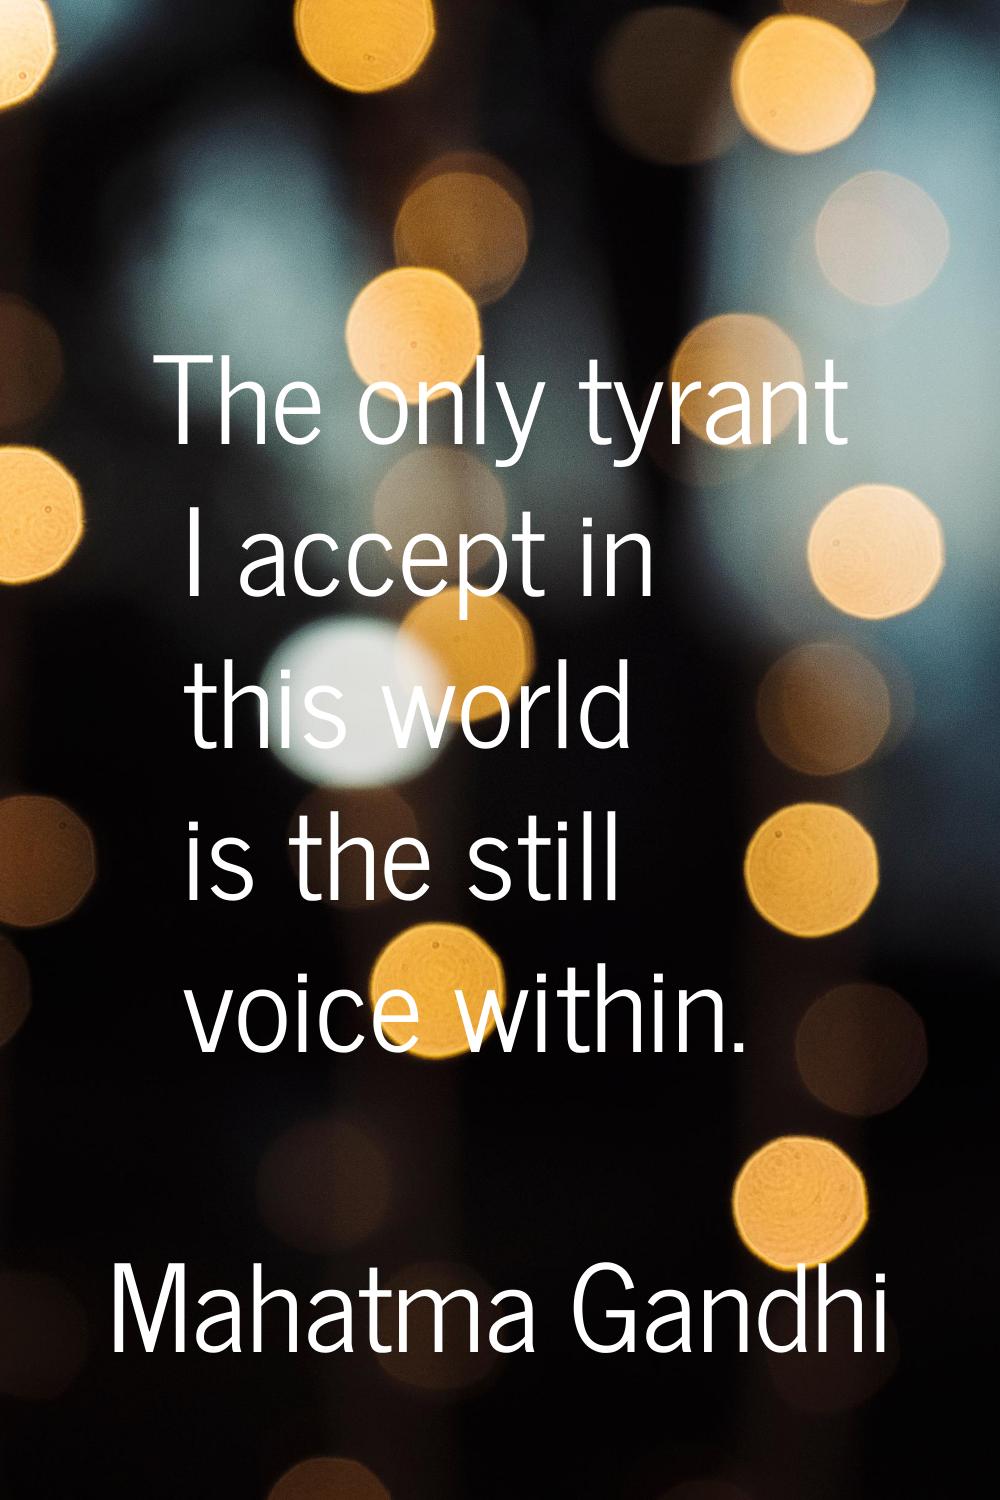 The only tyrant I accept in this world is the still voice within.